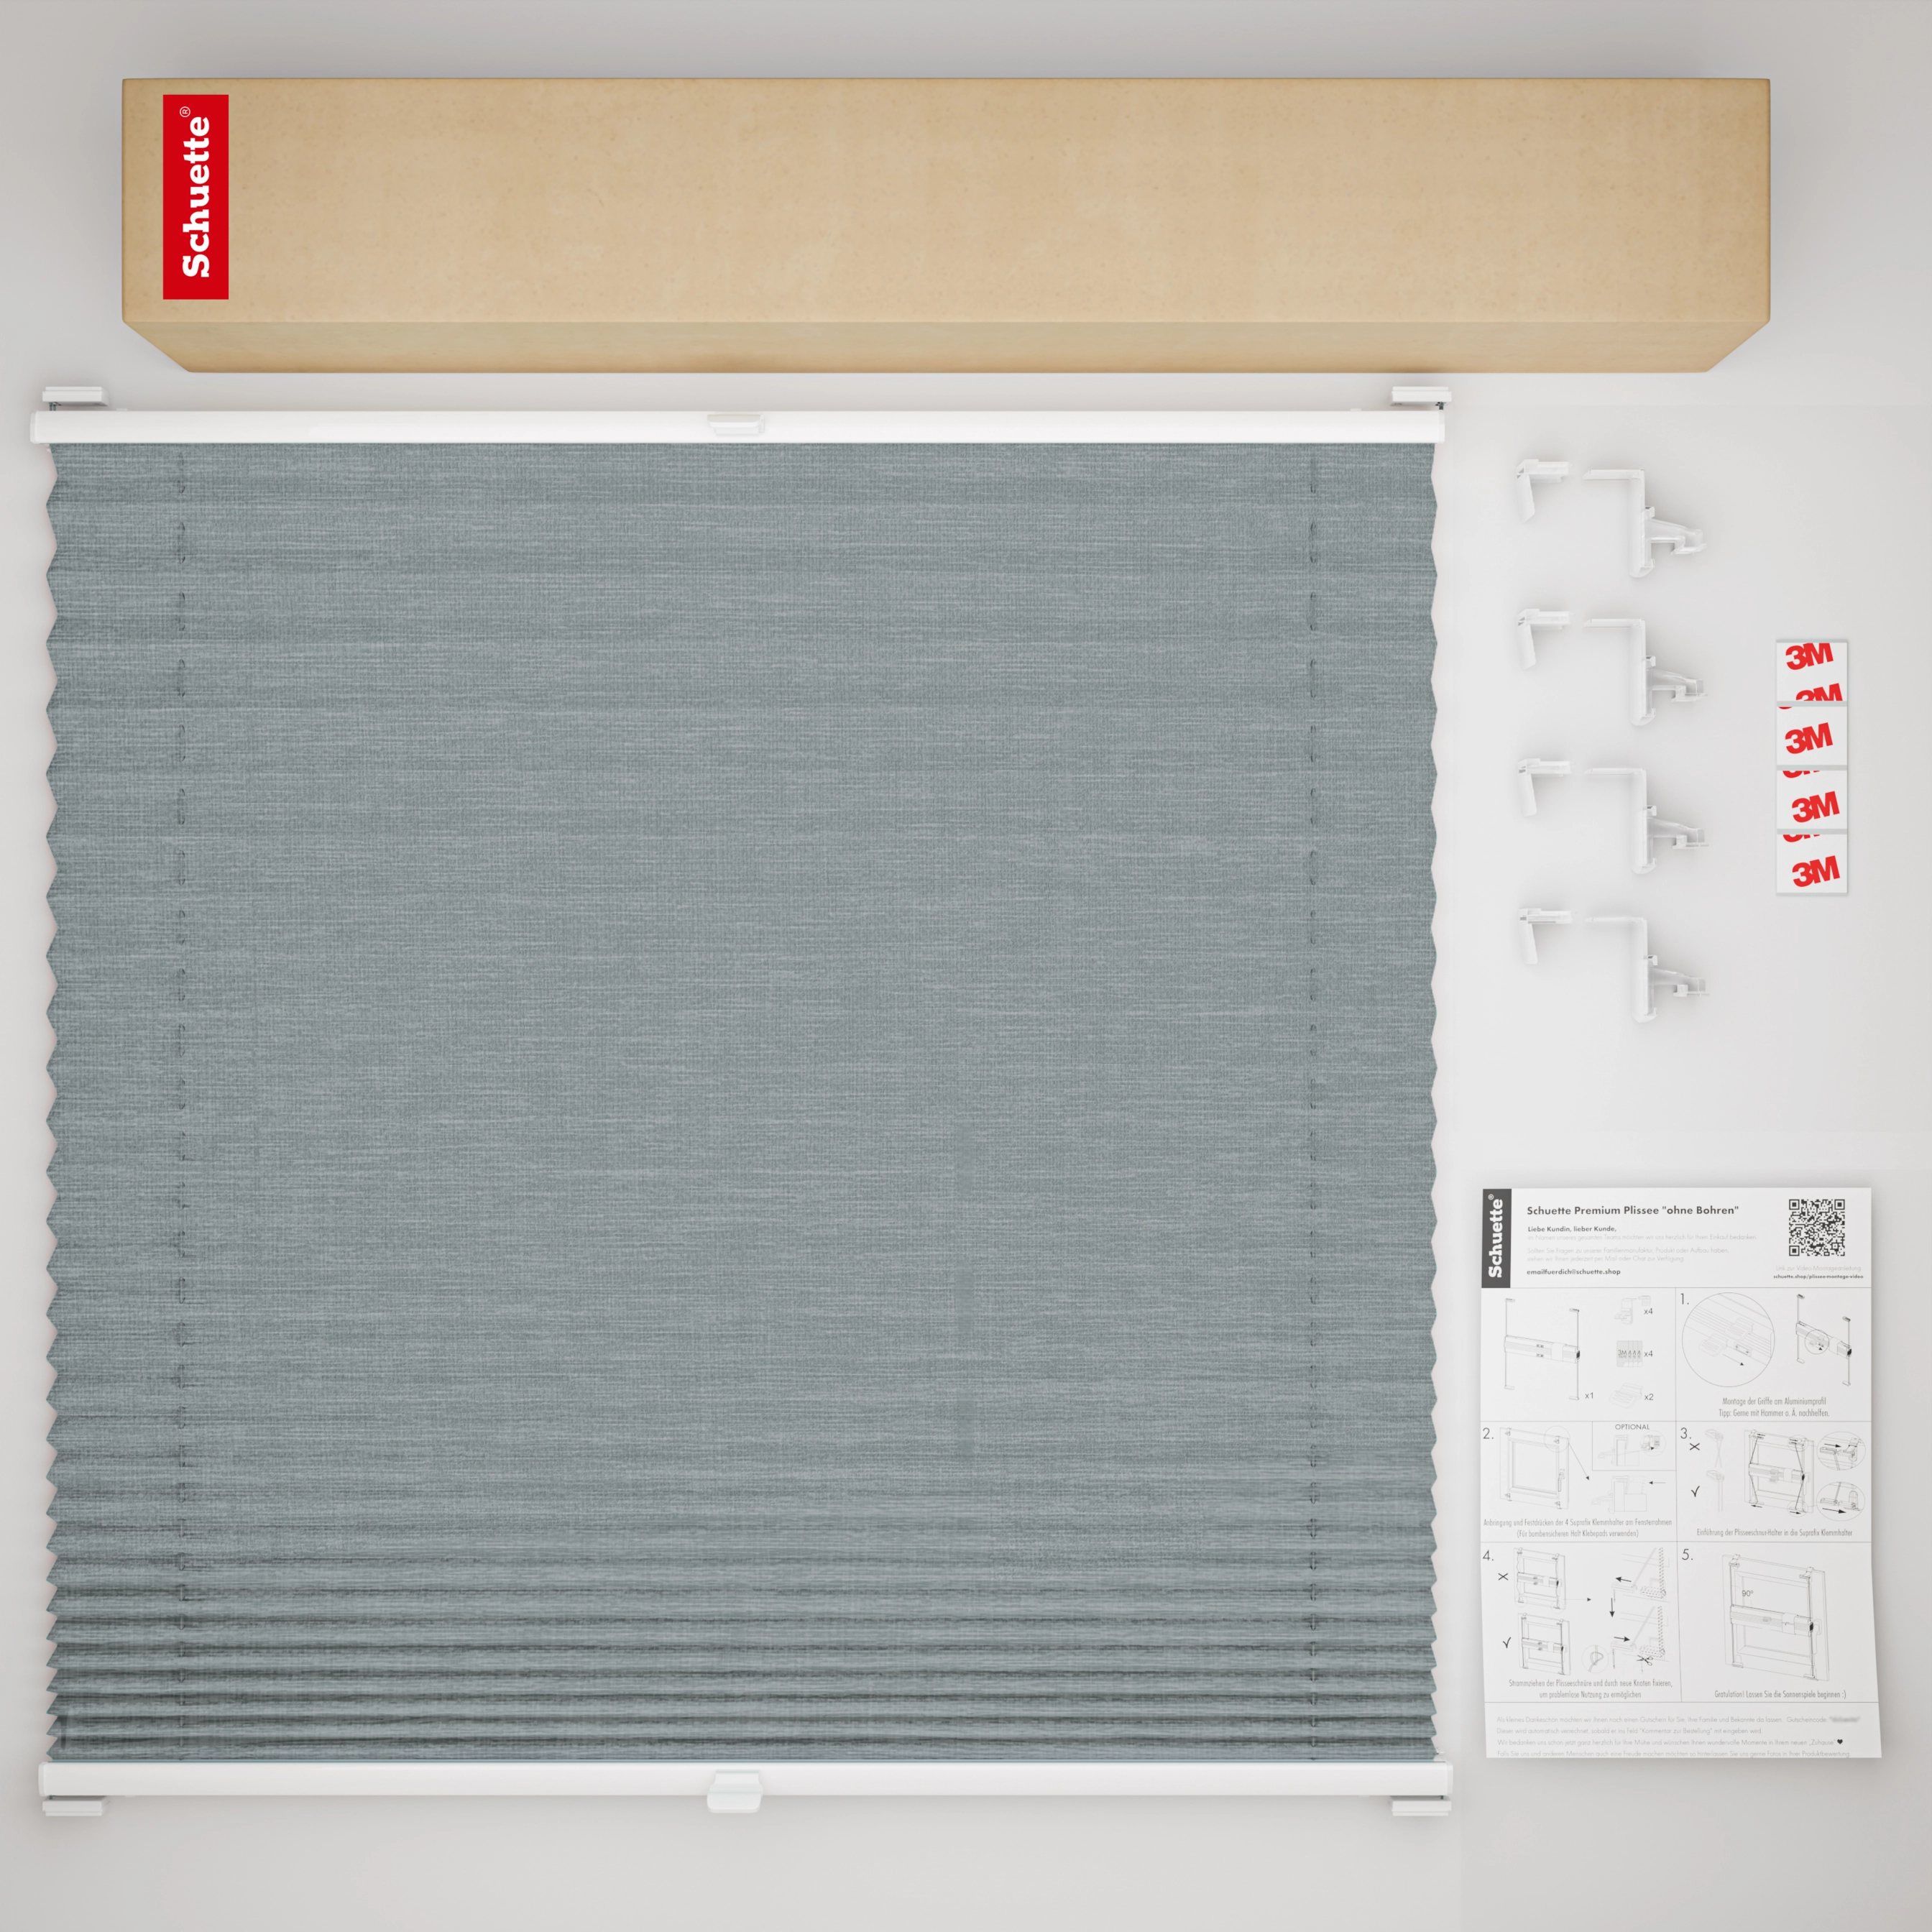 Schuette® Pleated Blind Made to Measure without Drilling • Suprafix Clamp holder “Incognito" Standard” • Melange Collection: Rocky Mountain (Grey) • Profile Colour: White